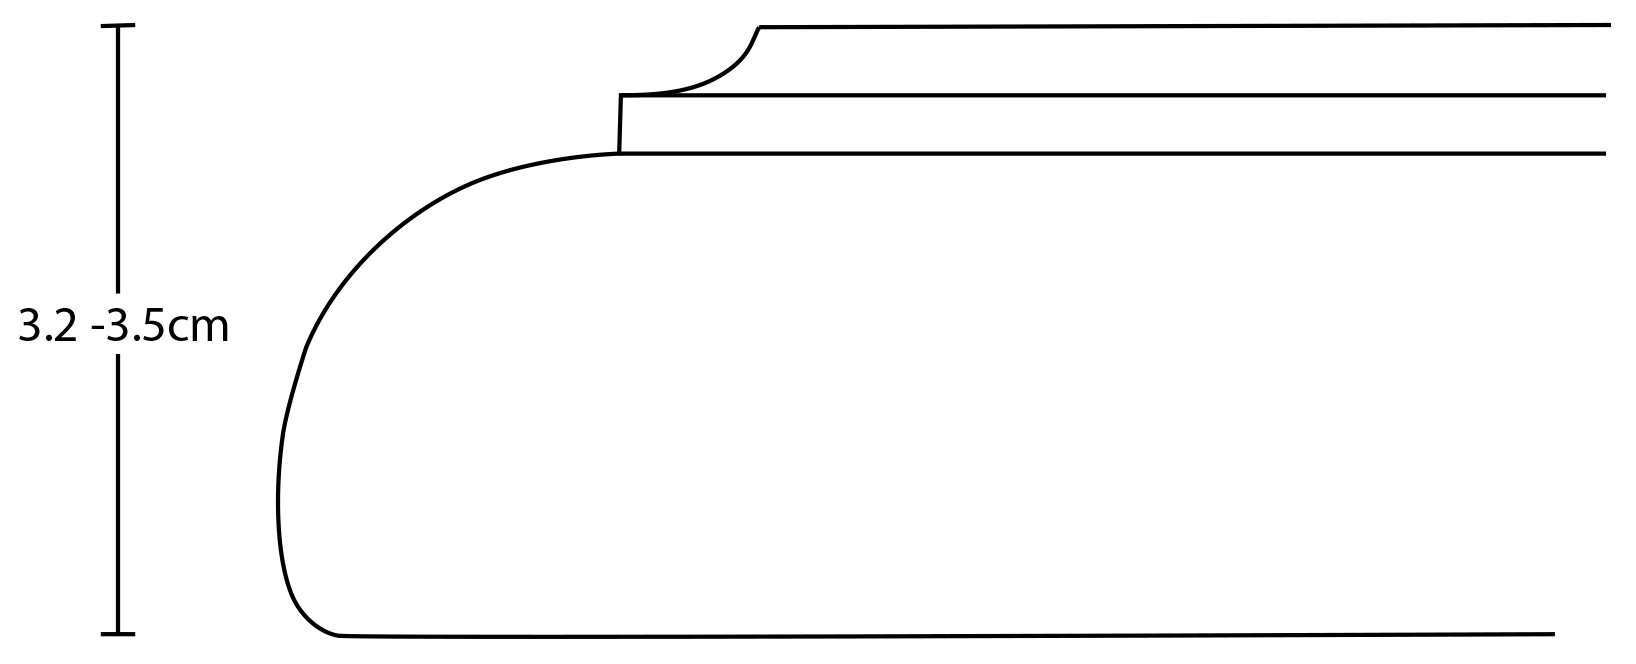 black and white line drawing of the profile of the marble tabletop with a black line to the left of the image scaled to 3.2 to 3.5 centimeters